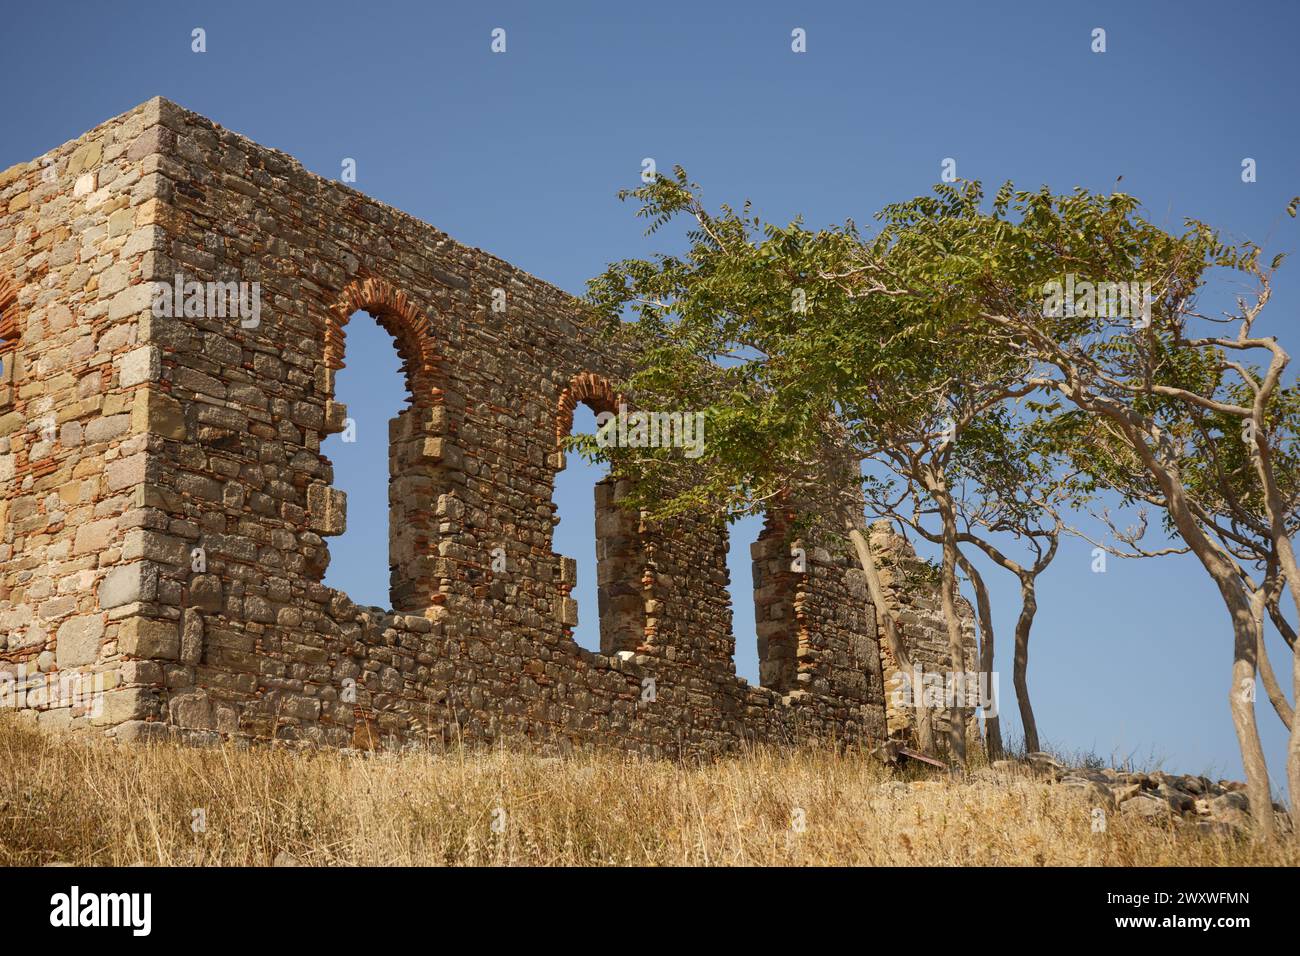 Ruins of a roofless stone building with three big windows stand next to a group of trees in Myrina castle, Lemnos island, Greece Stock Photo